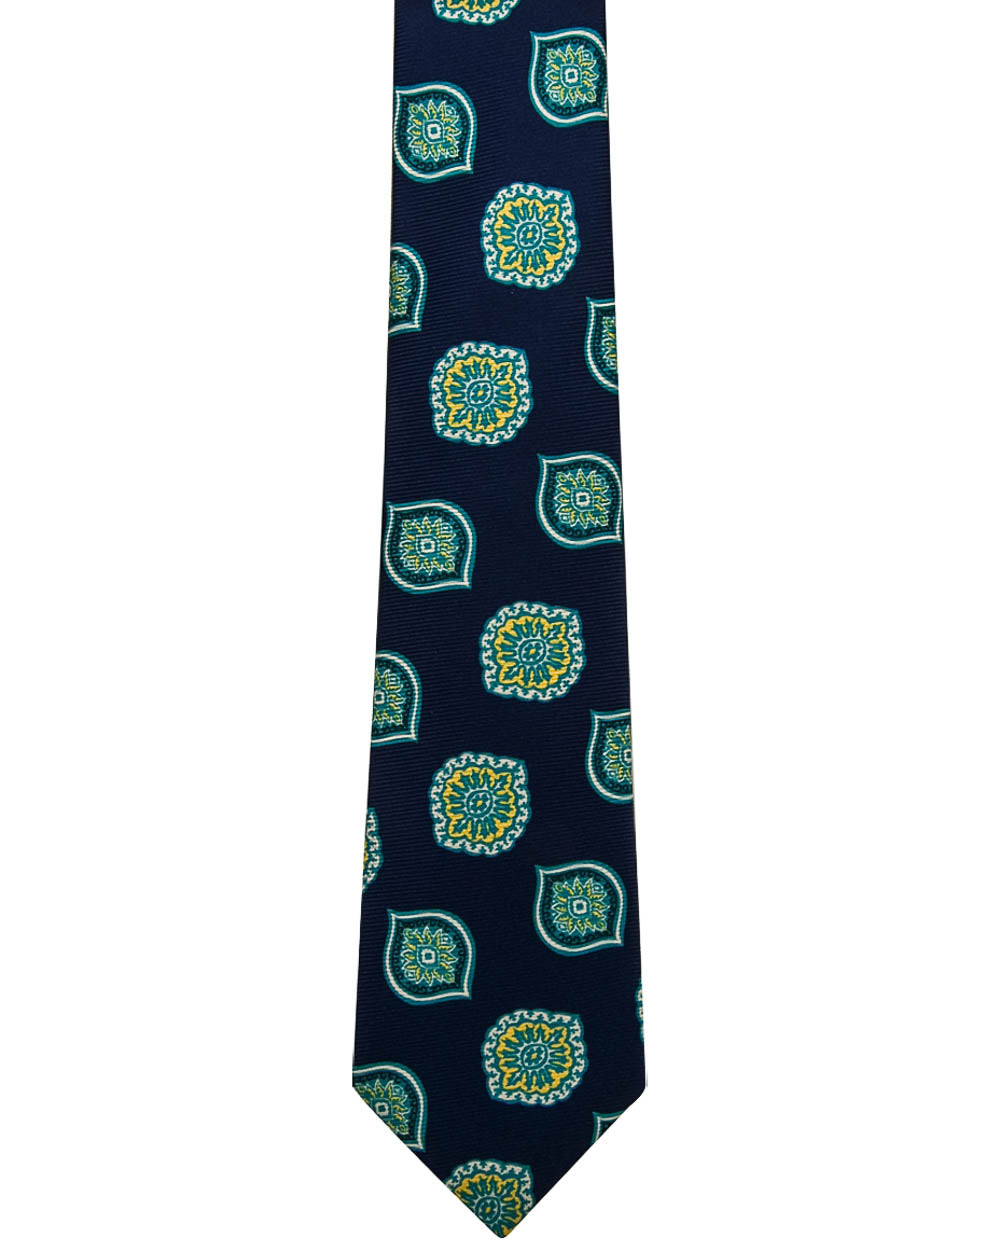 Navy with Aqua and Yellow Medallion Tie